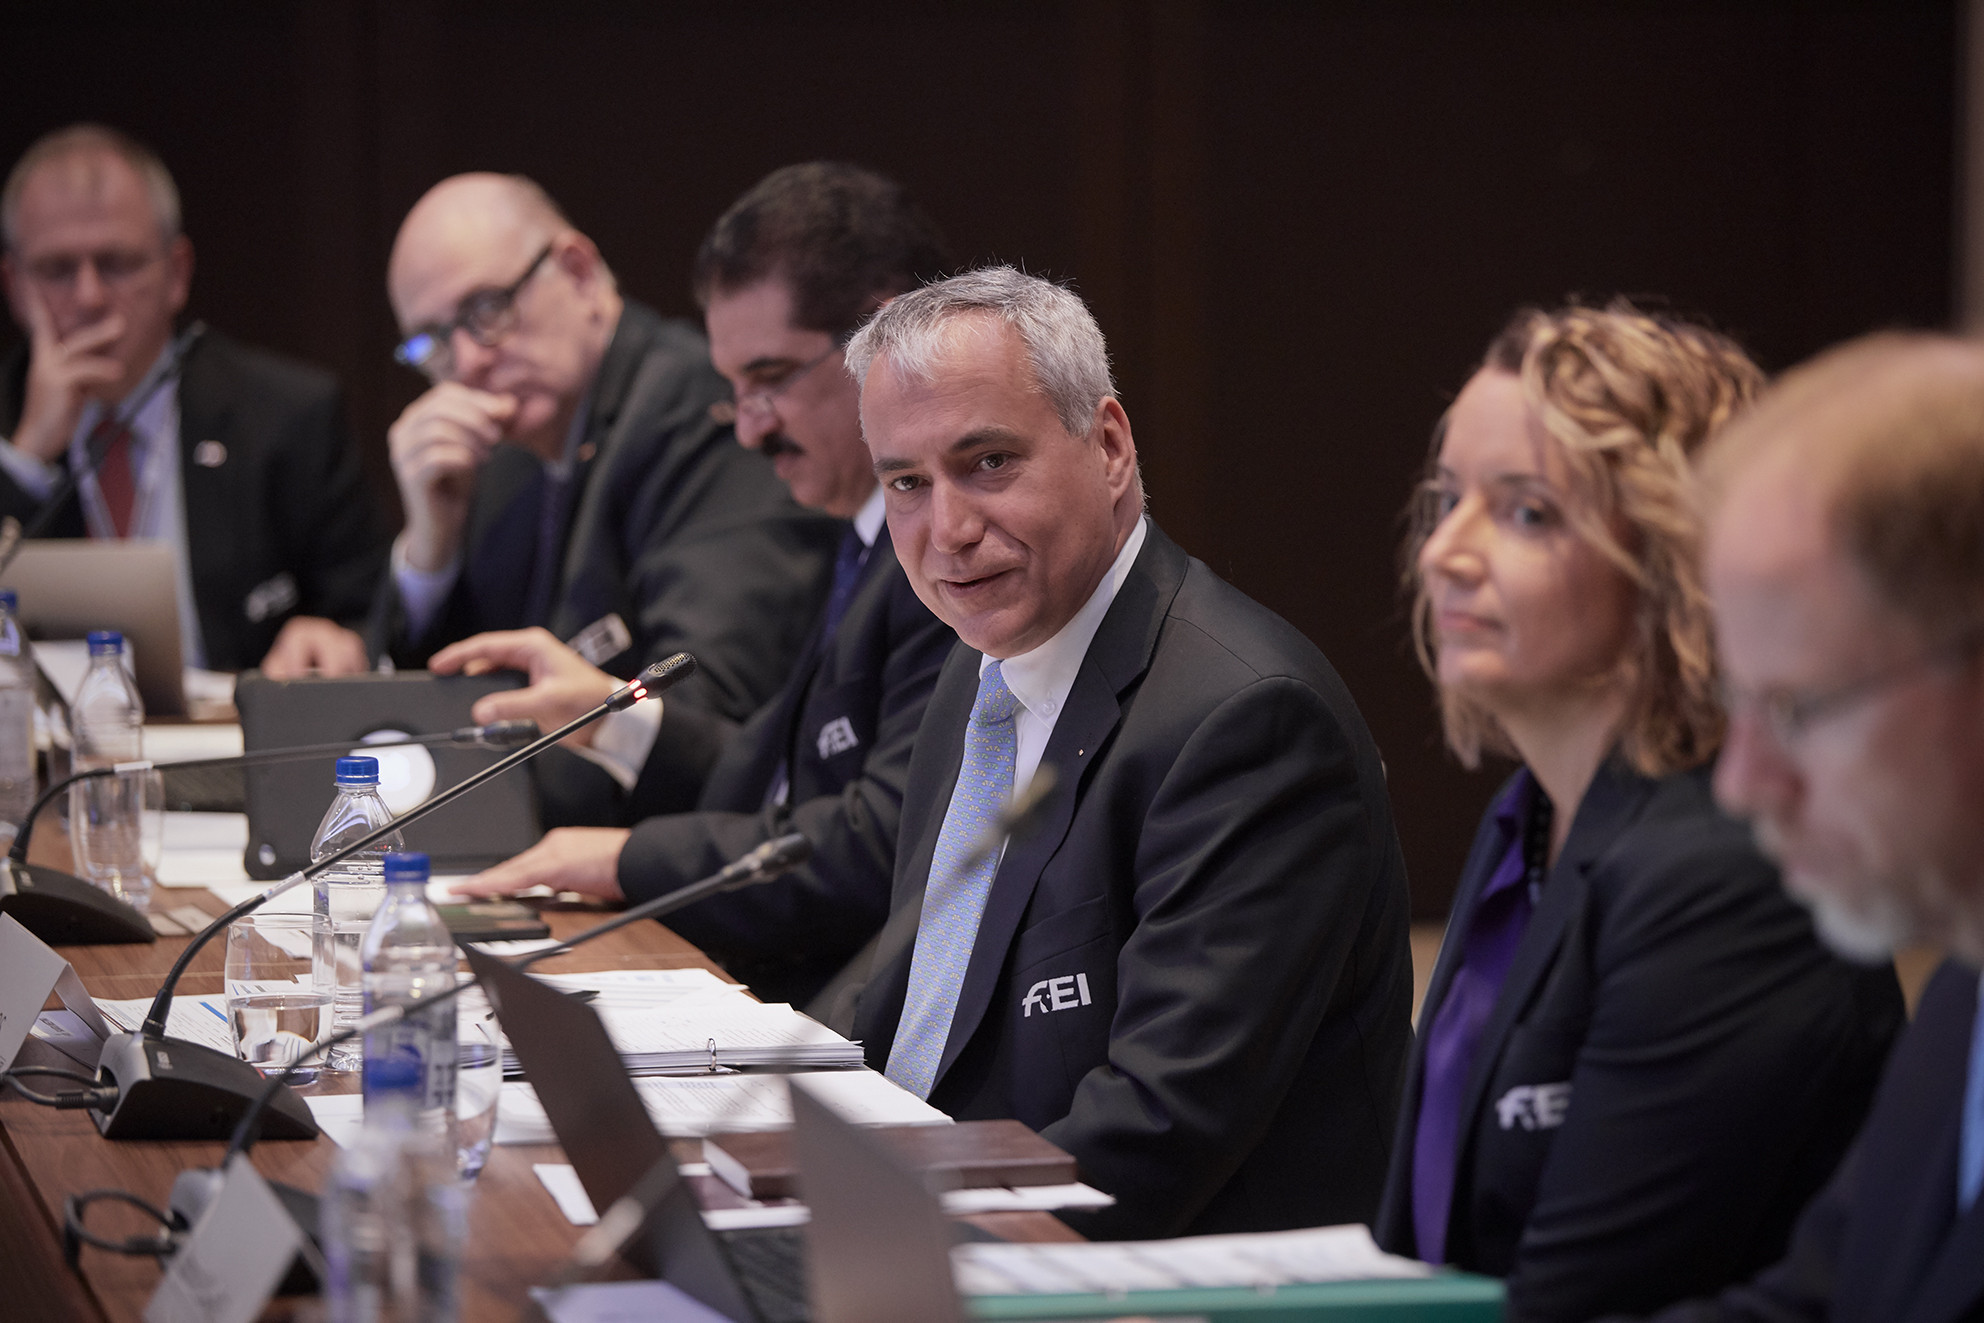 The FEI awarded the events at its latest Board meeting ©FEI